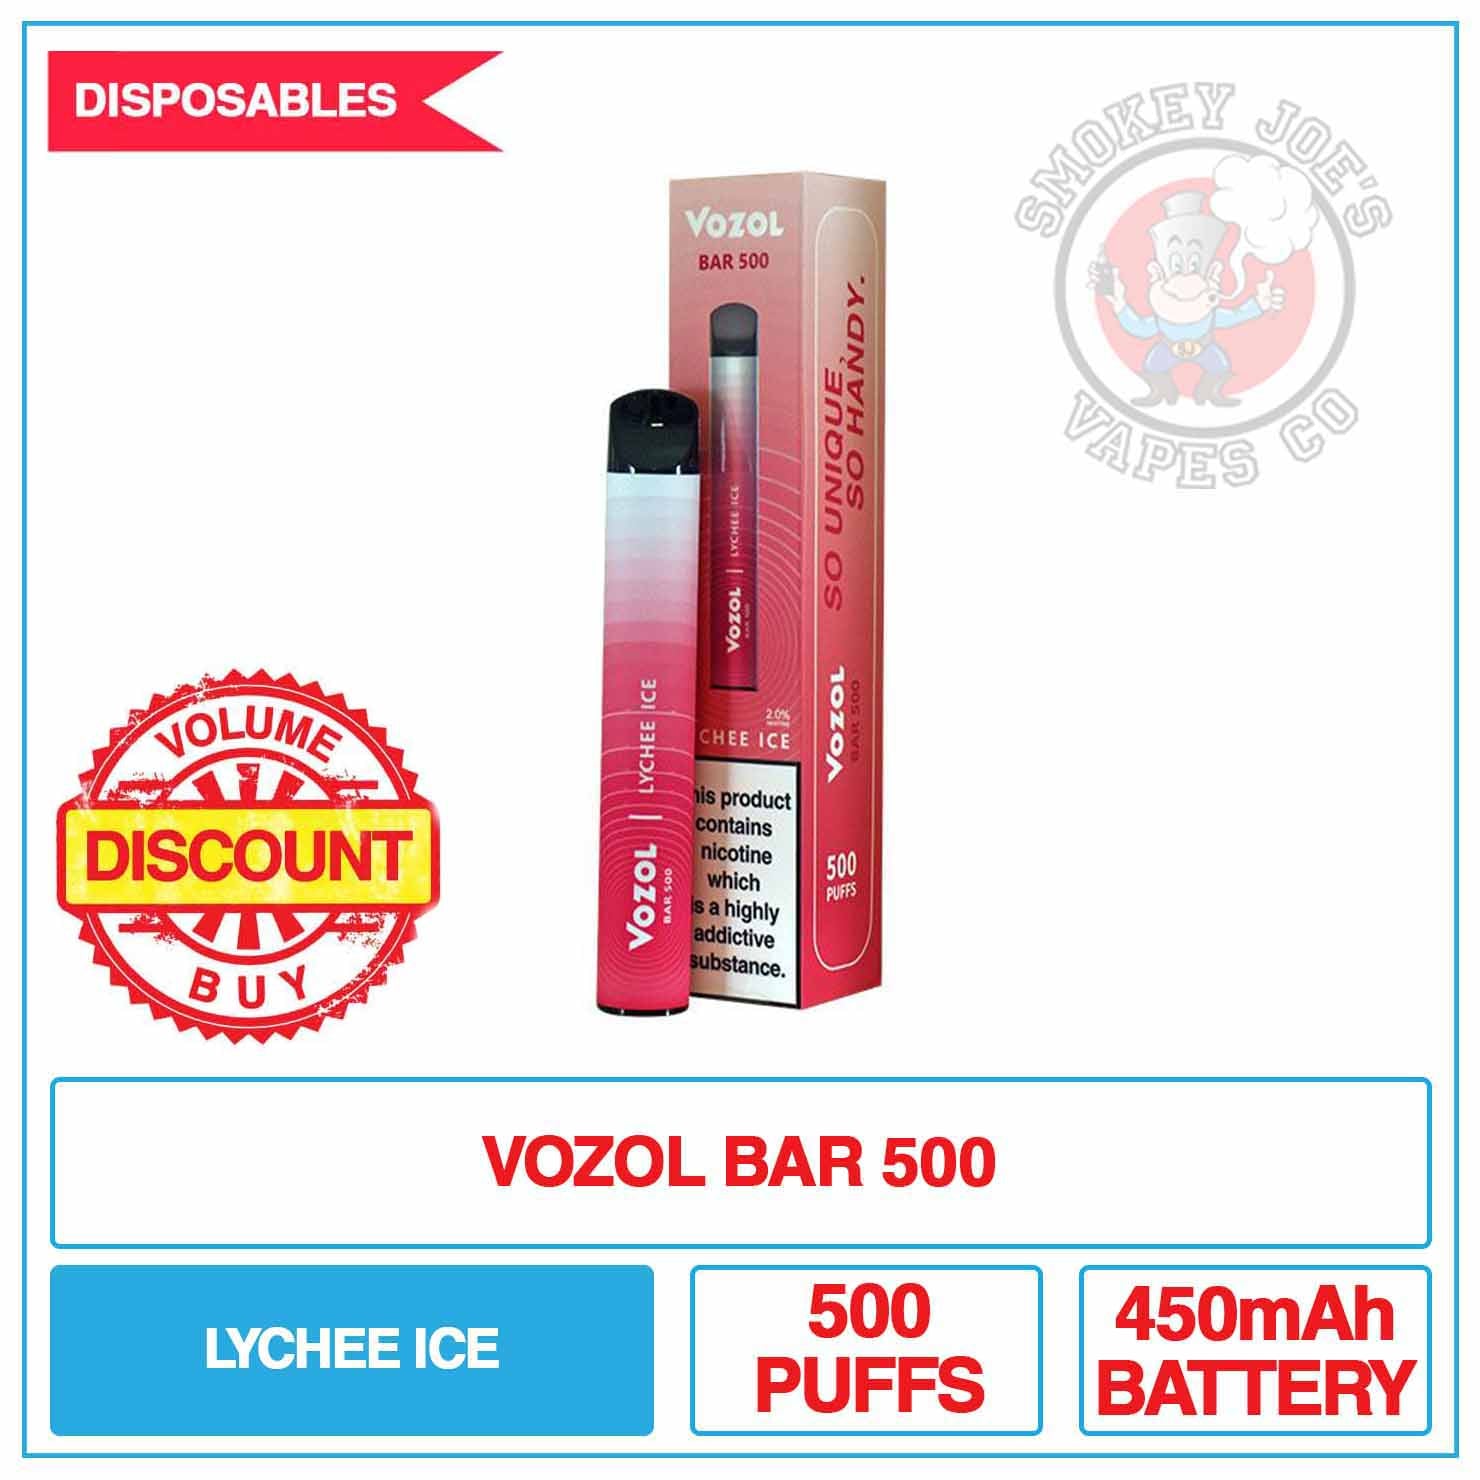 See all Ice Blox products online at SmokeyJoes